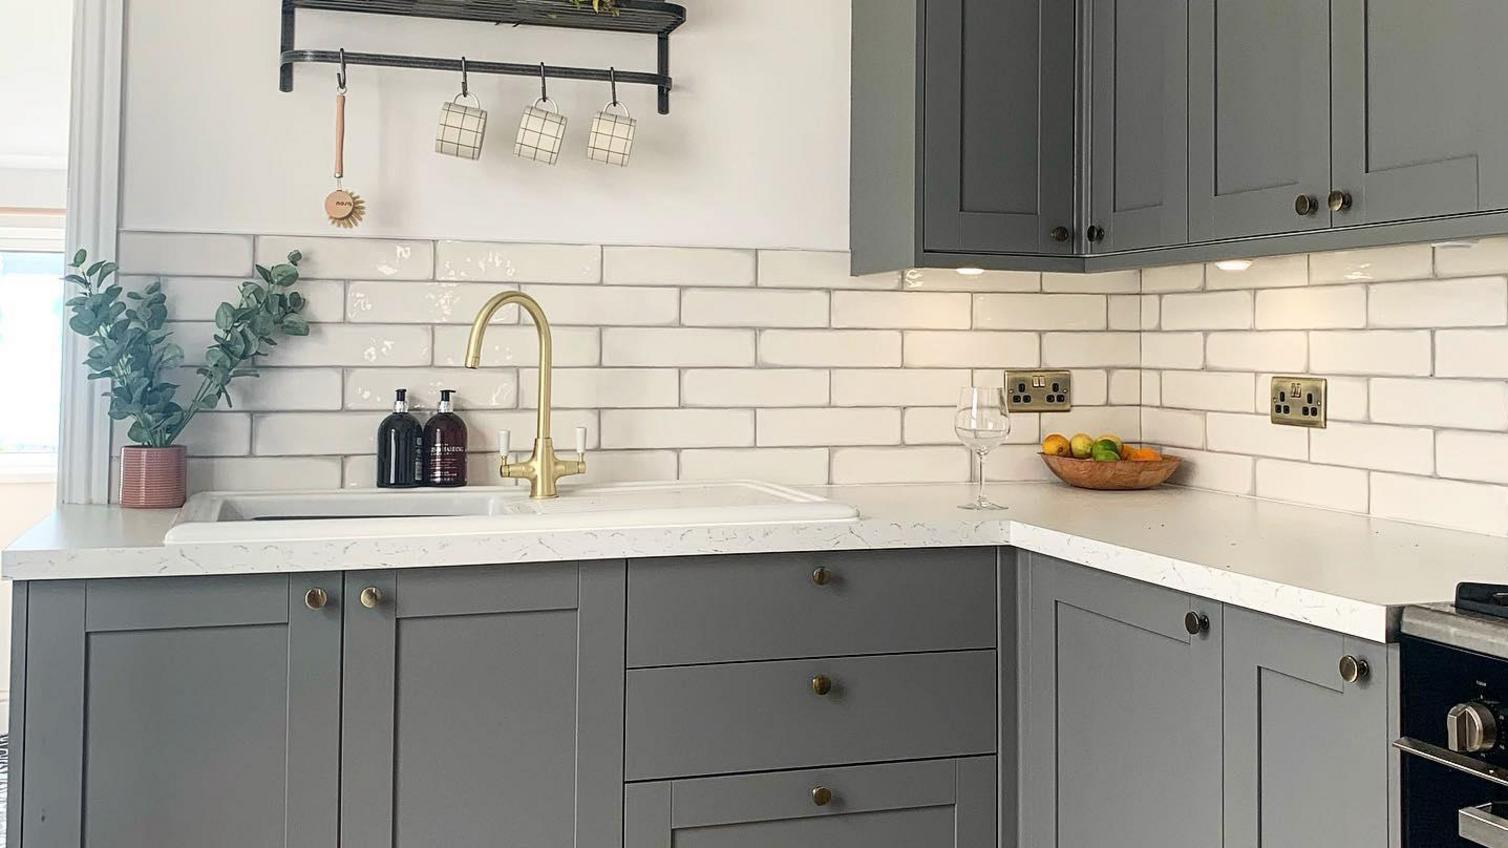 A grey shaker kitchen from Hwodens in a bright white kitchen with wall tiling